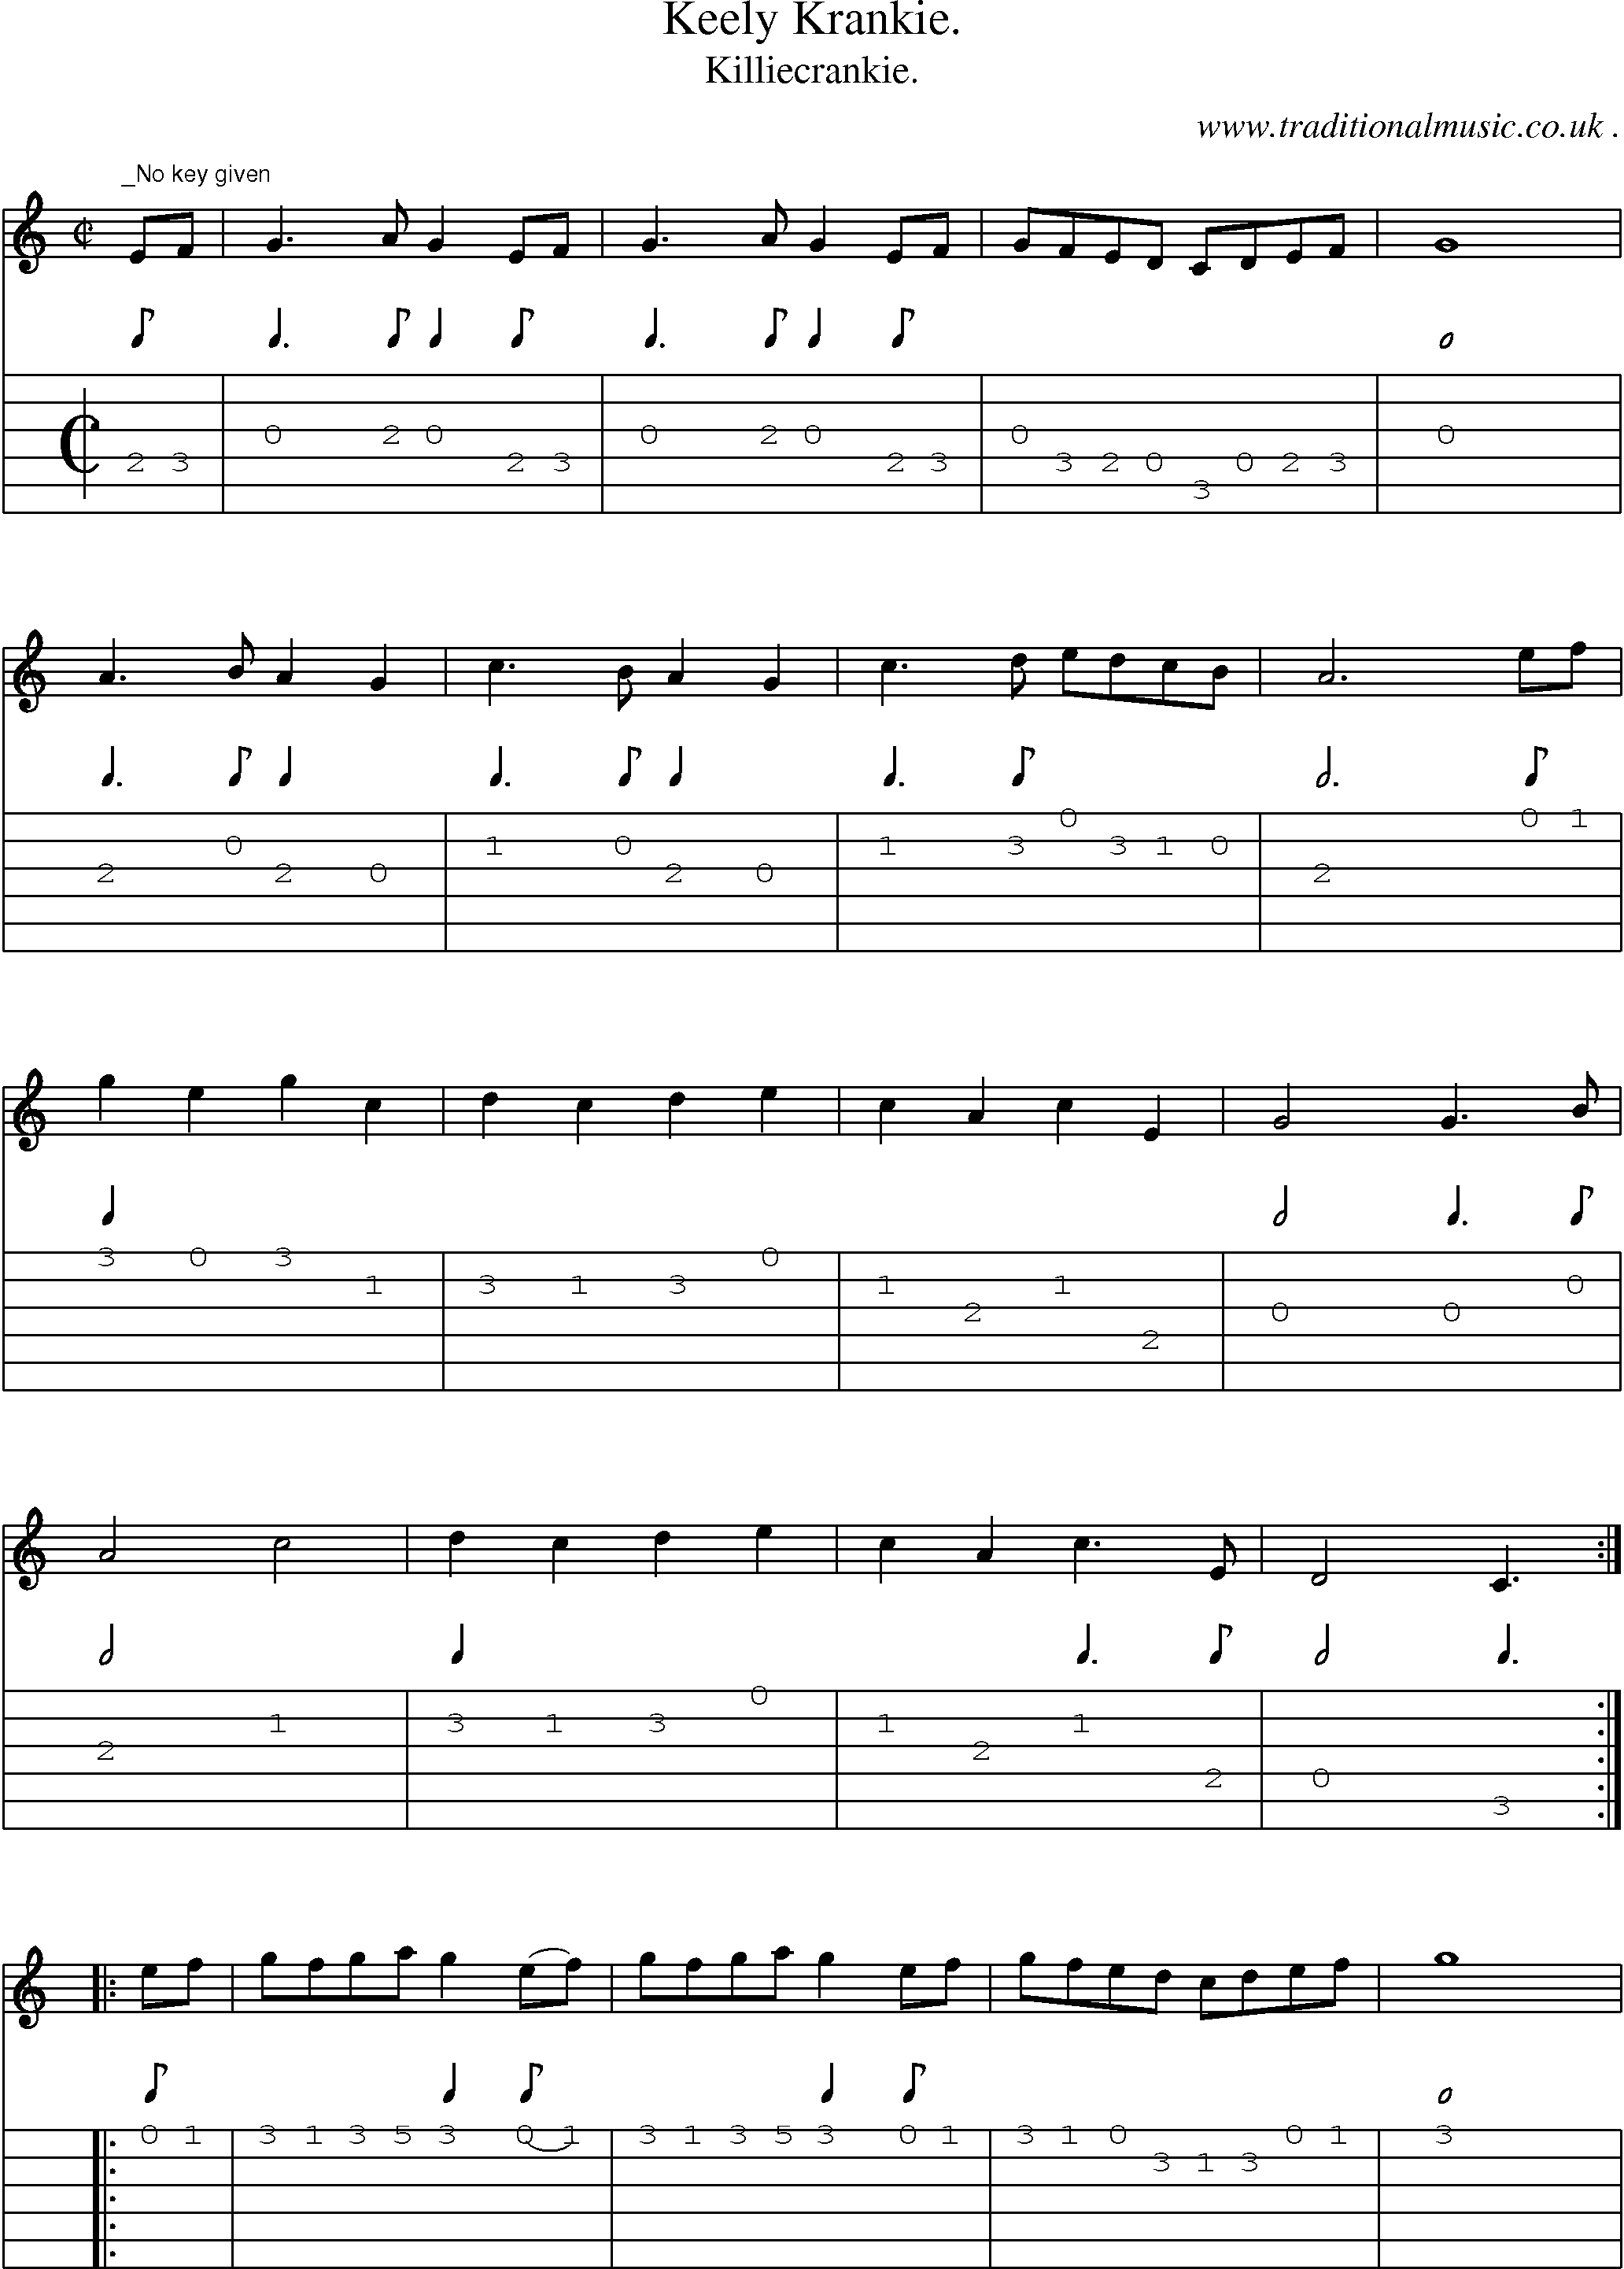 Sheet-Music and Guitar Tabs for Keely Krankie